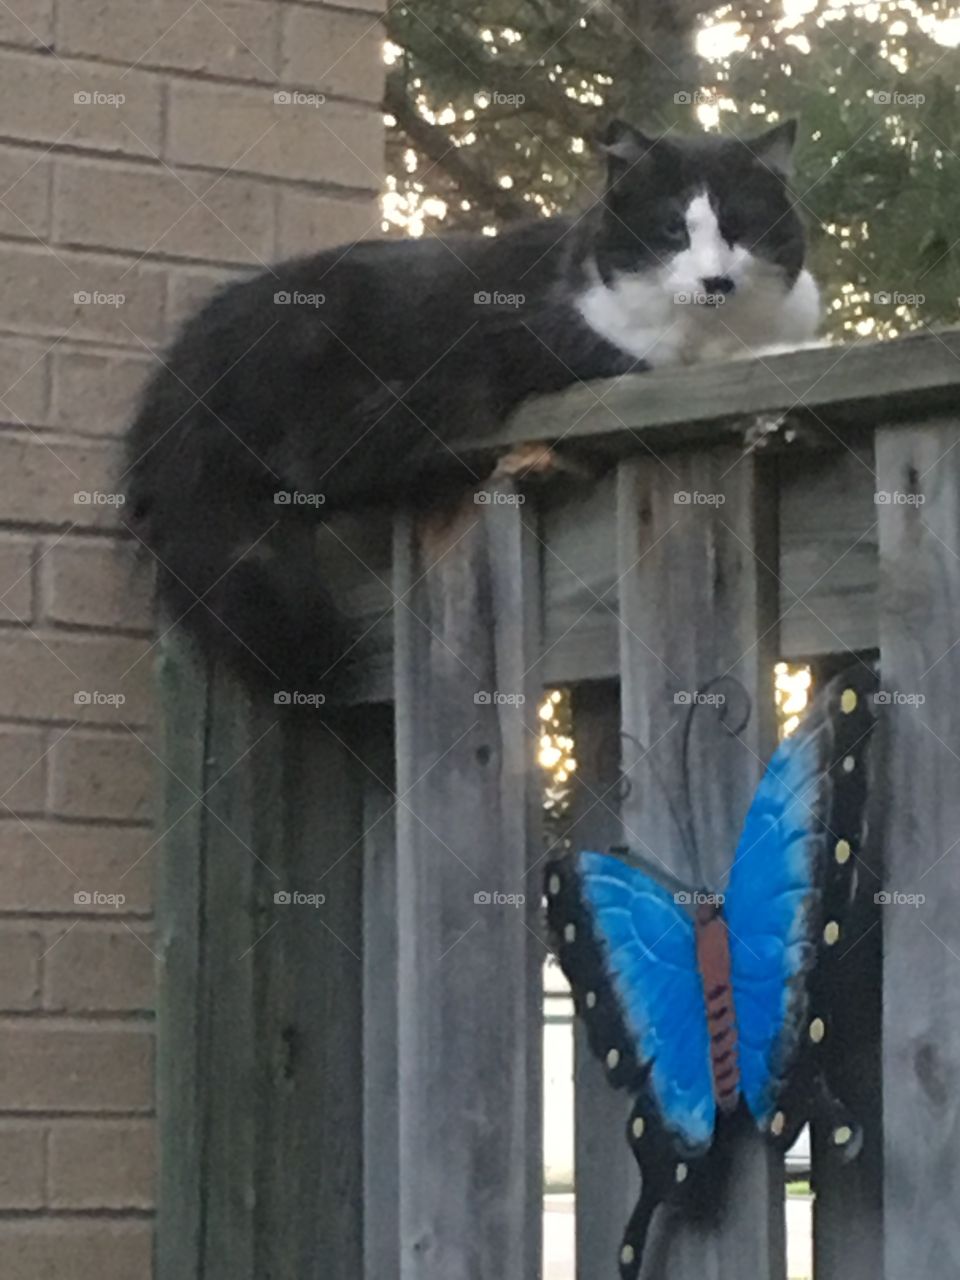 Unique tuxedo smokey cat on a grey fence relaxing in the sun shine near butterfly contrasting neutrals to butterfly.